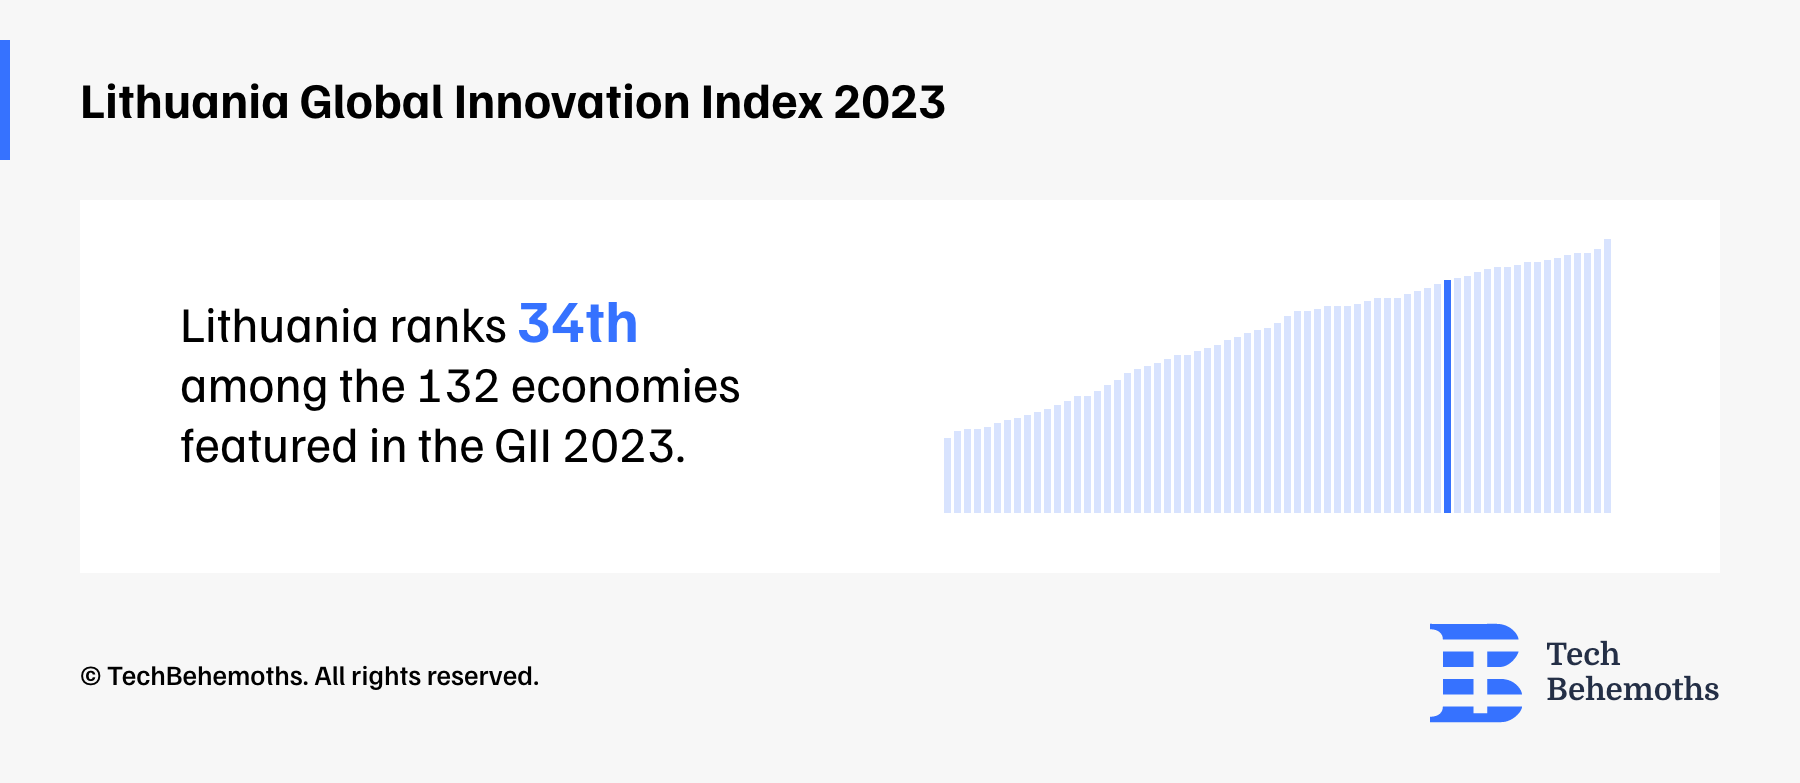 Lithuania Global Innovation Index 2023